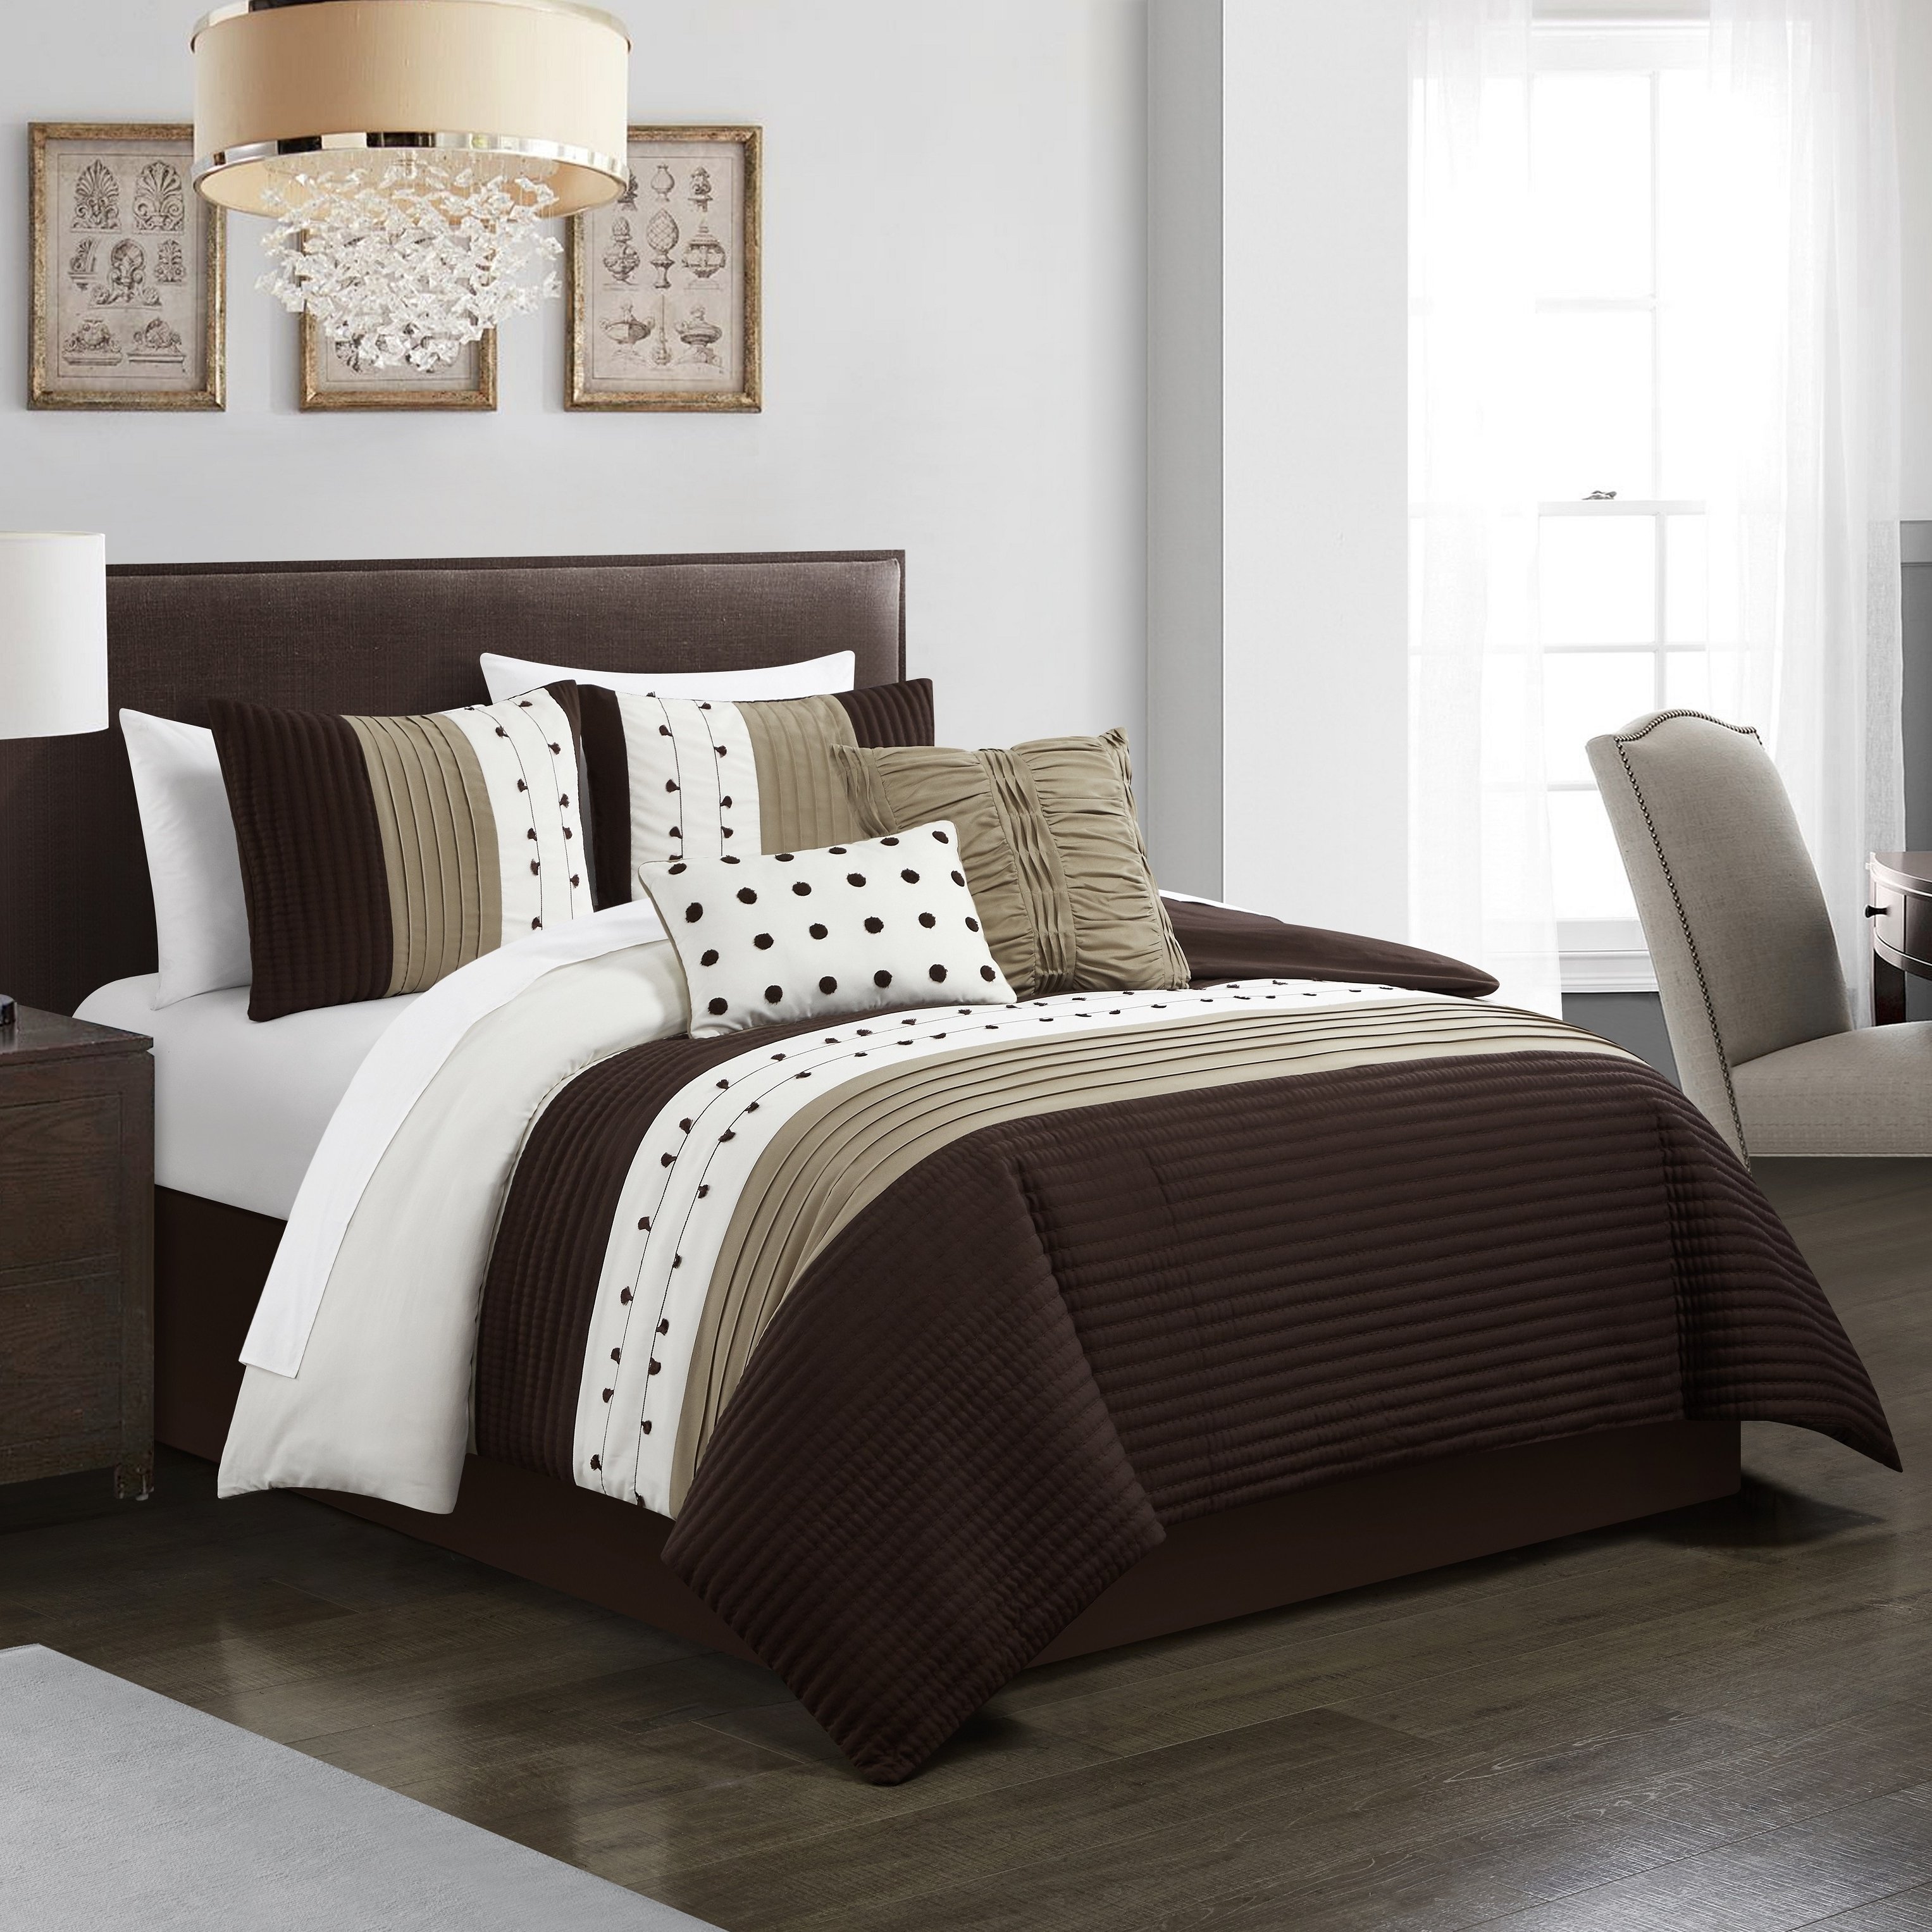 Lainy 5 Piece Comforter Set Color Block Pleated Ribbed Embroidered Bedding - Brown, King